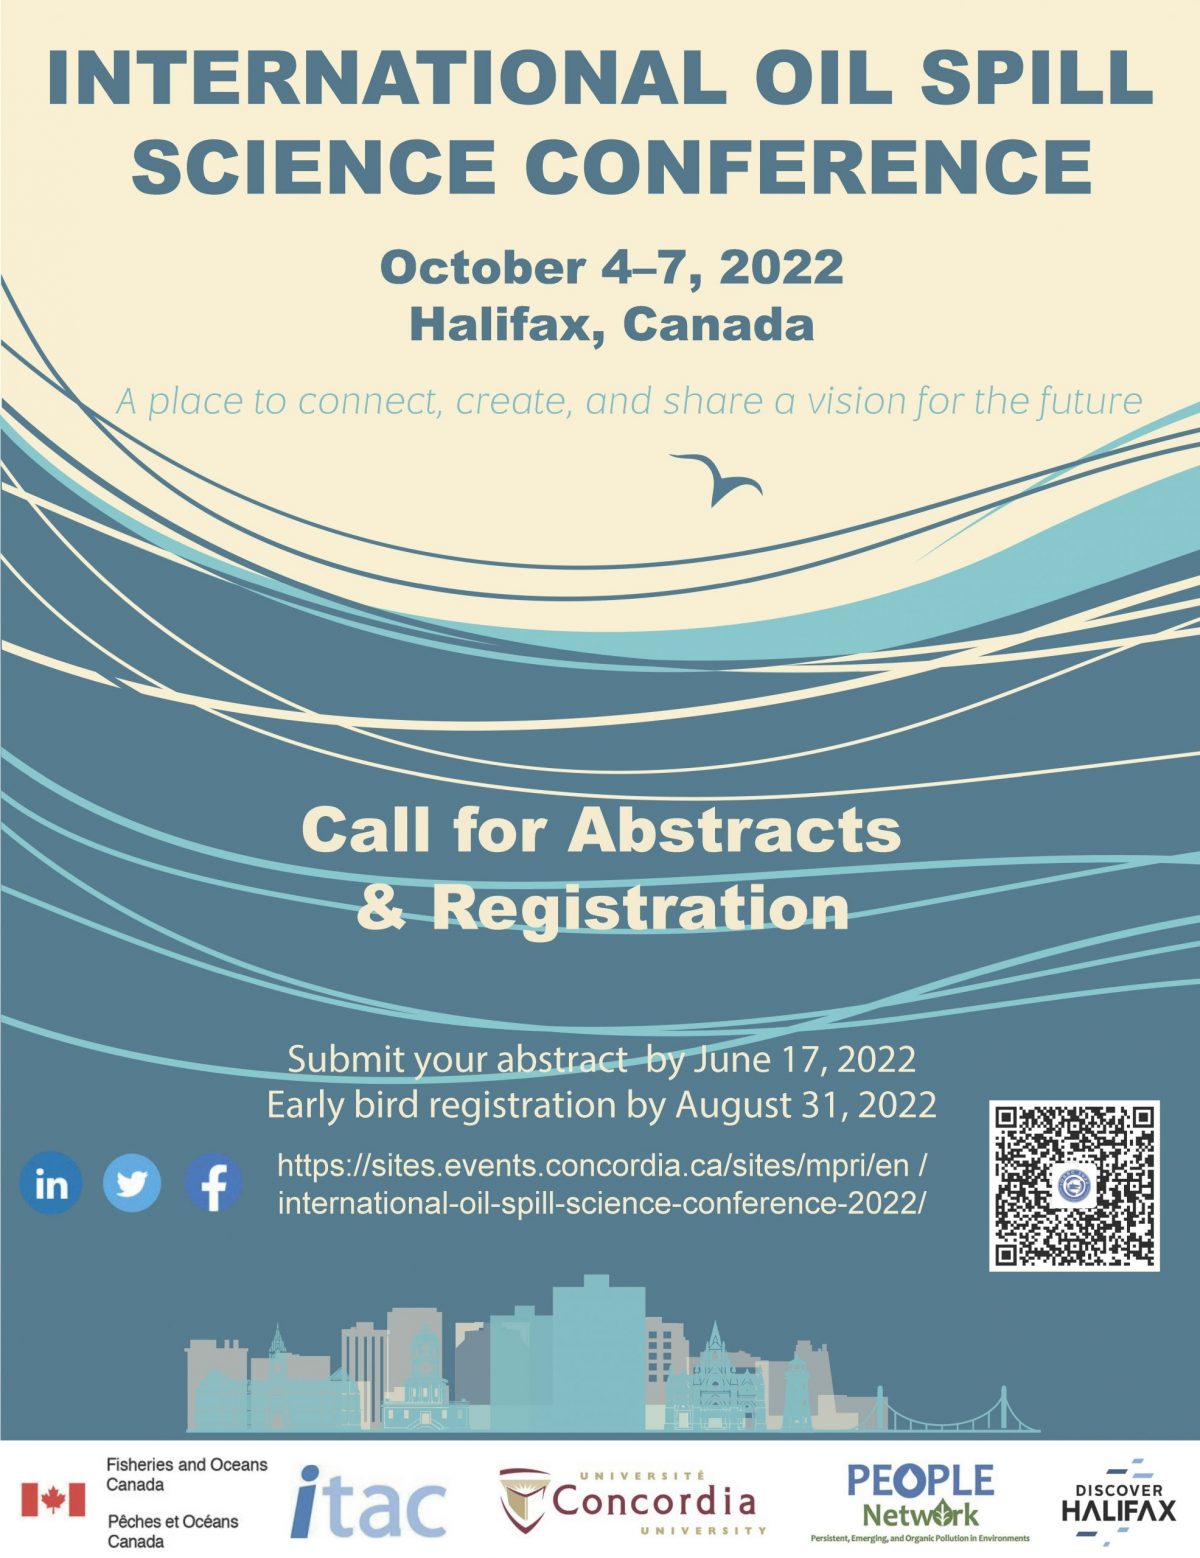 IOSSC 2022 Call for Abstracts & Open for Registration!